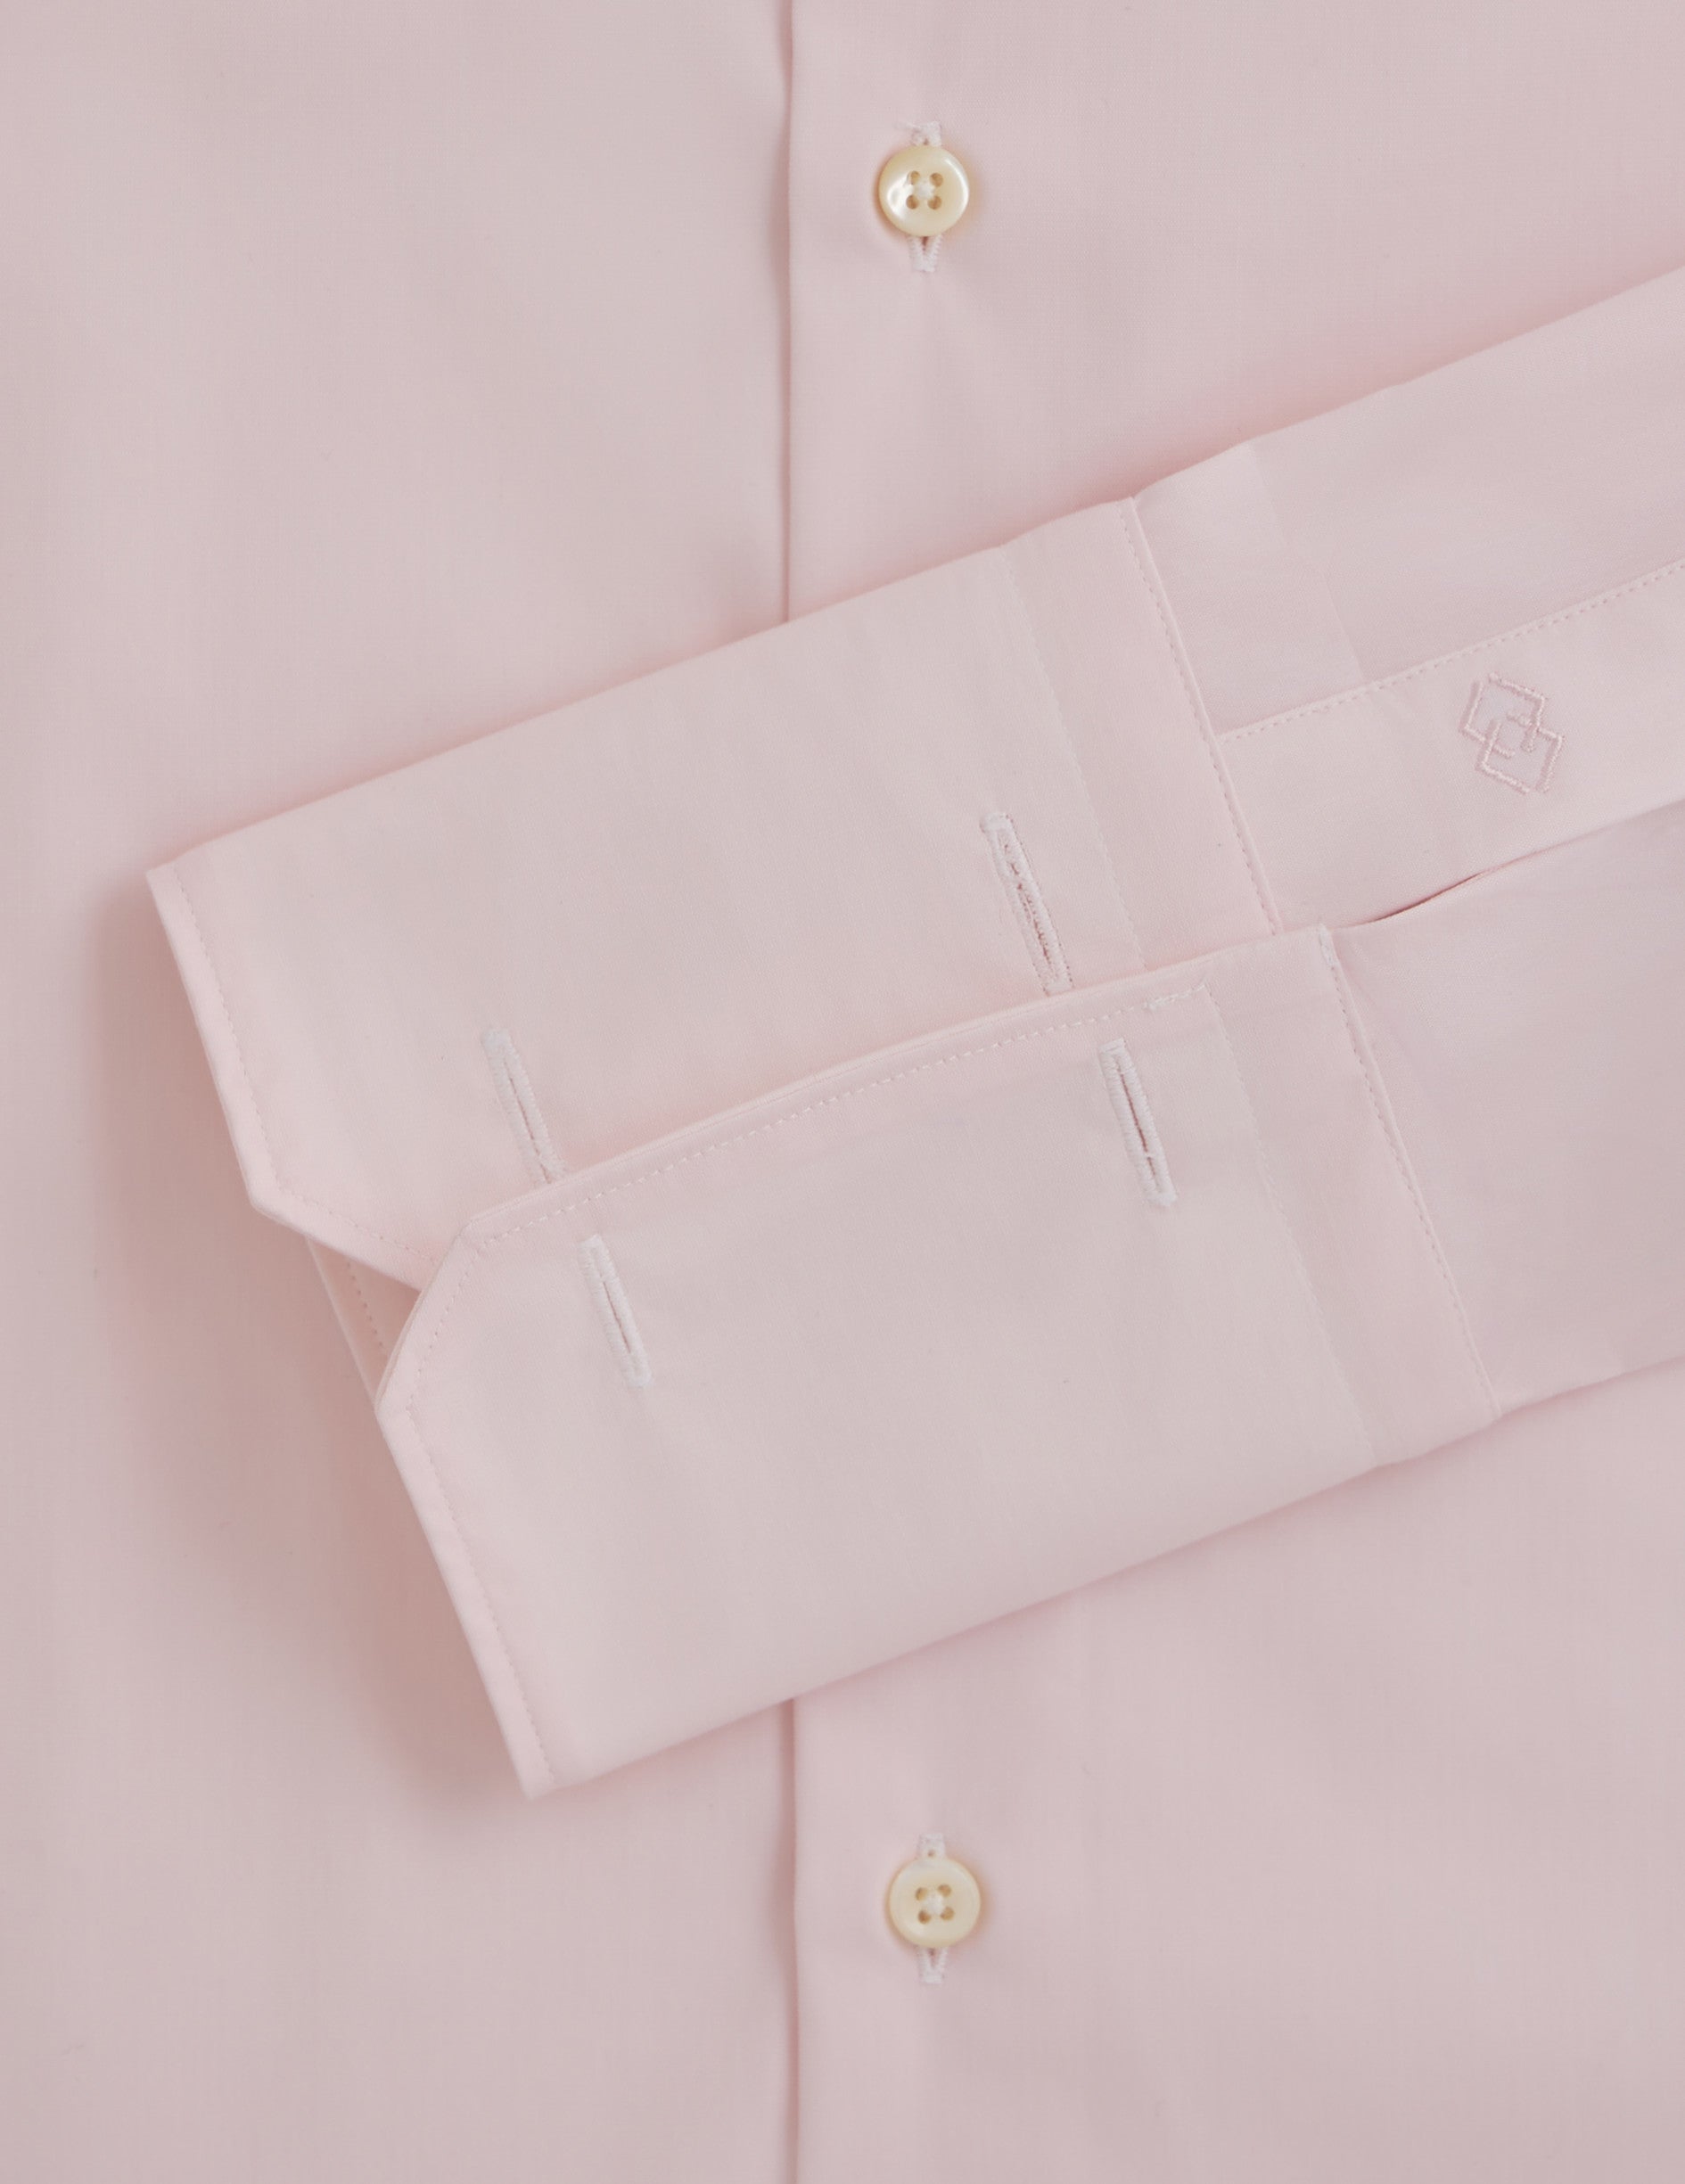 Fitted pink shirt - Wire to wire - Figaret Collar - French Cuffs